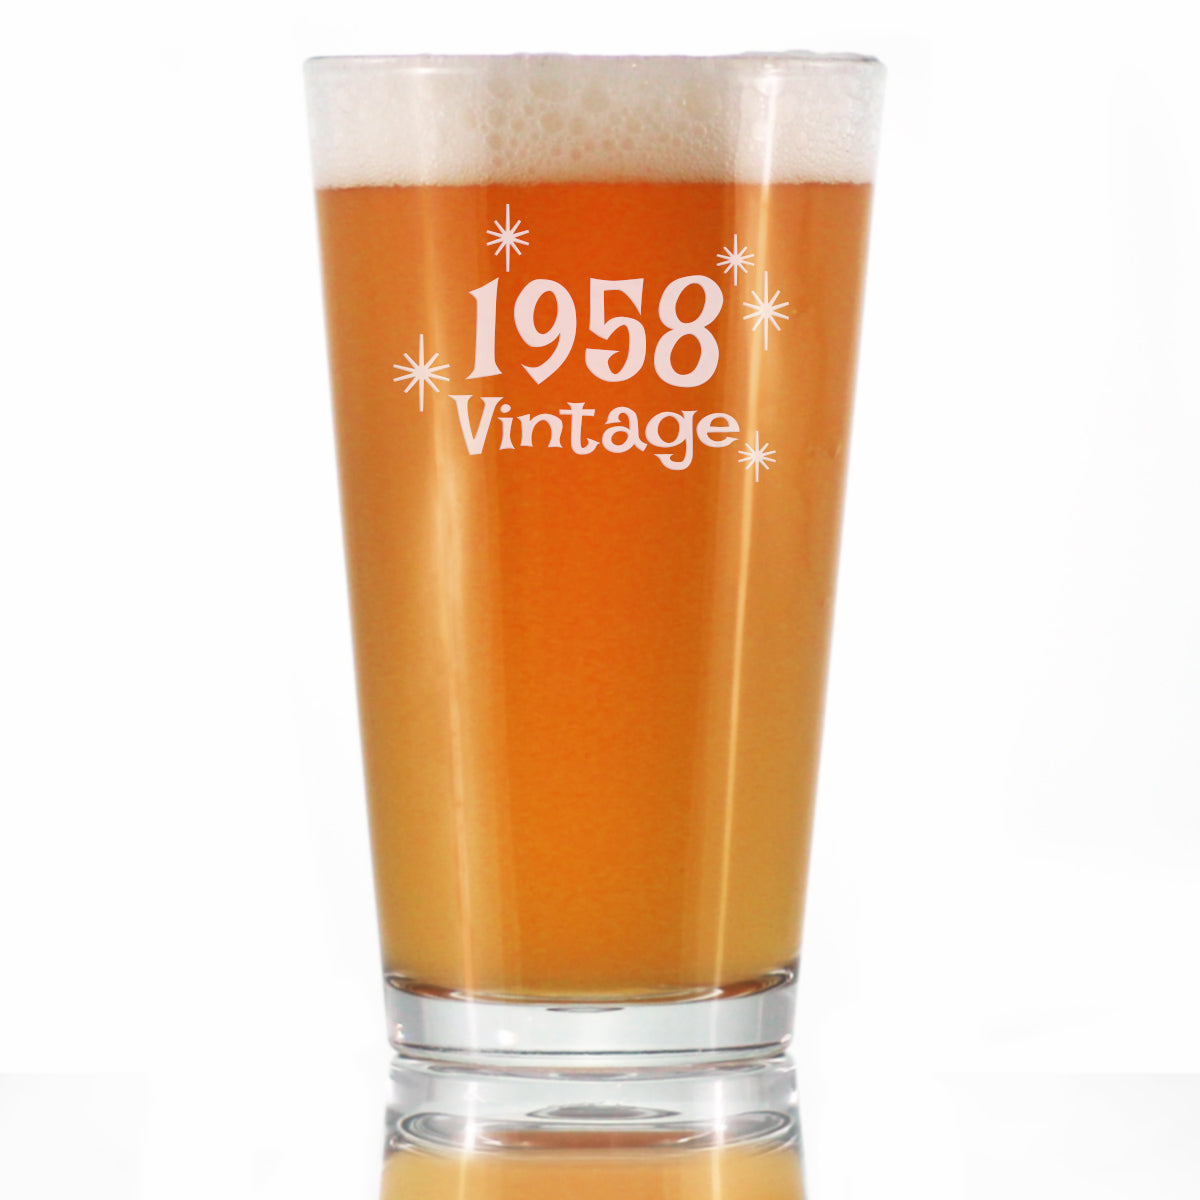 Vintage 1958 - Pint Glass for Beer - 65th Birthday Gifts for Men or Women Turning 65 - Fun Bday Party Decor - 16 oz